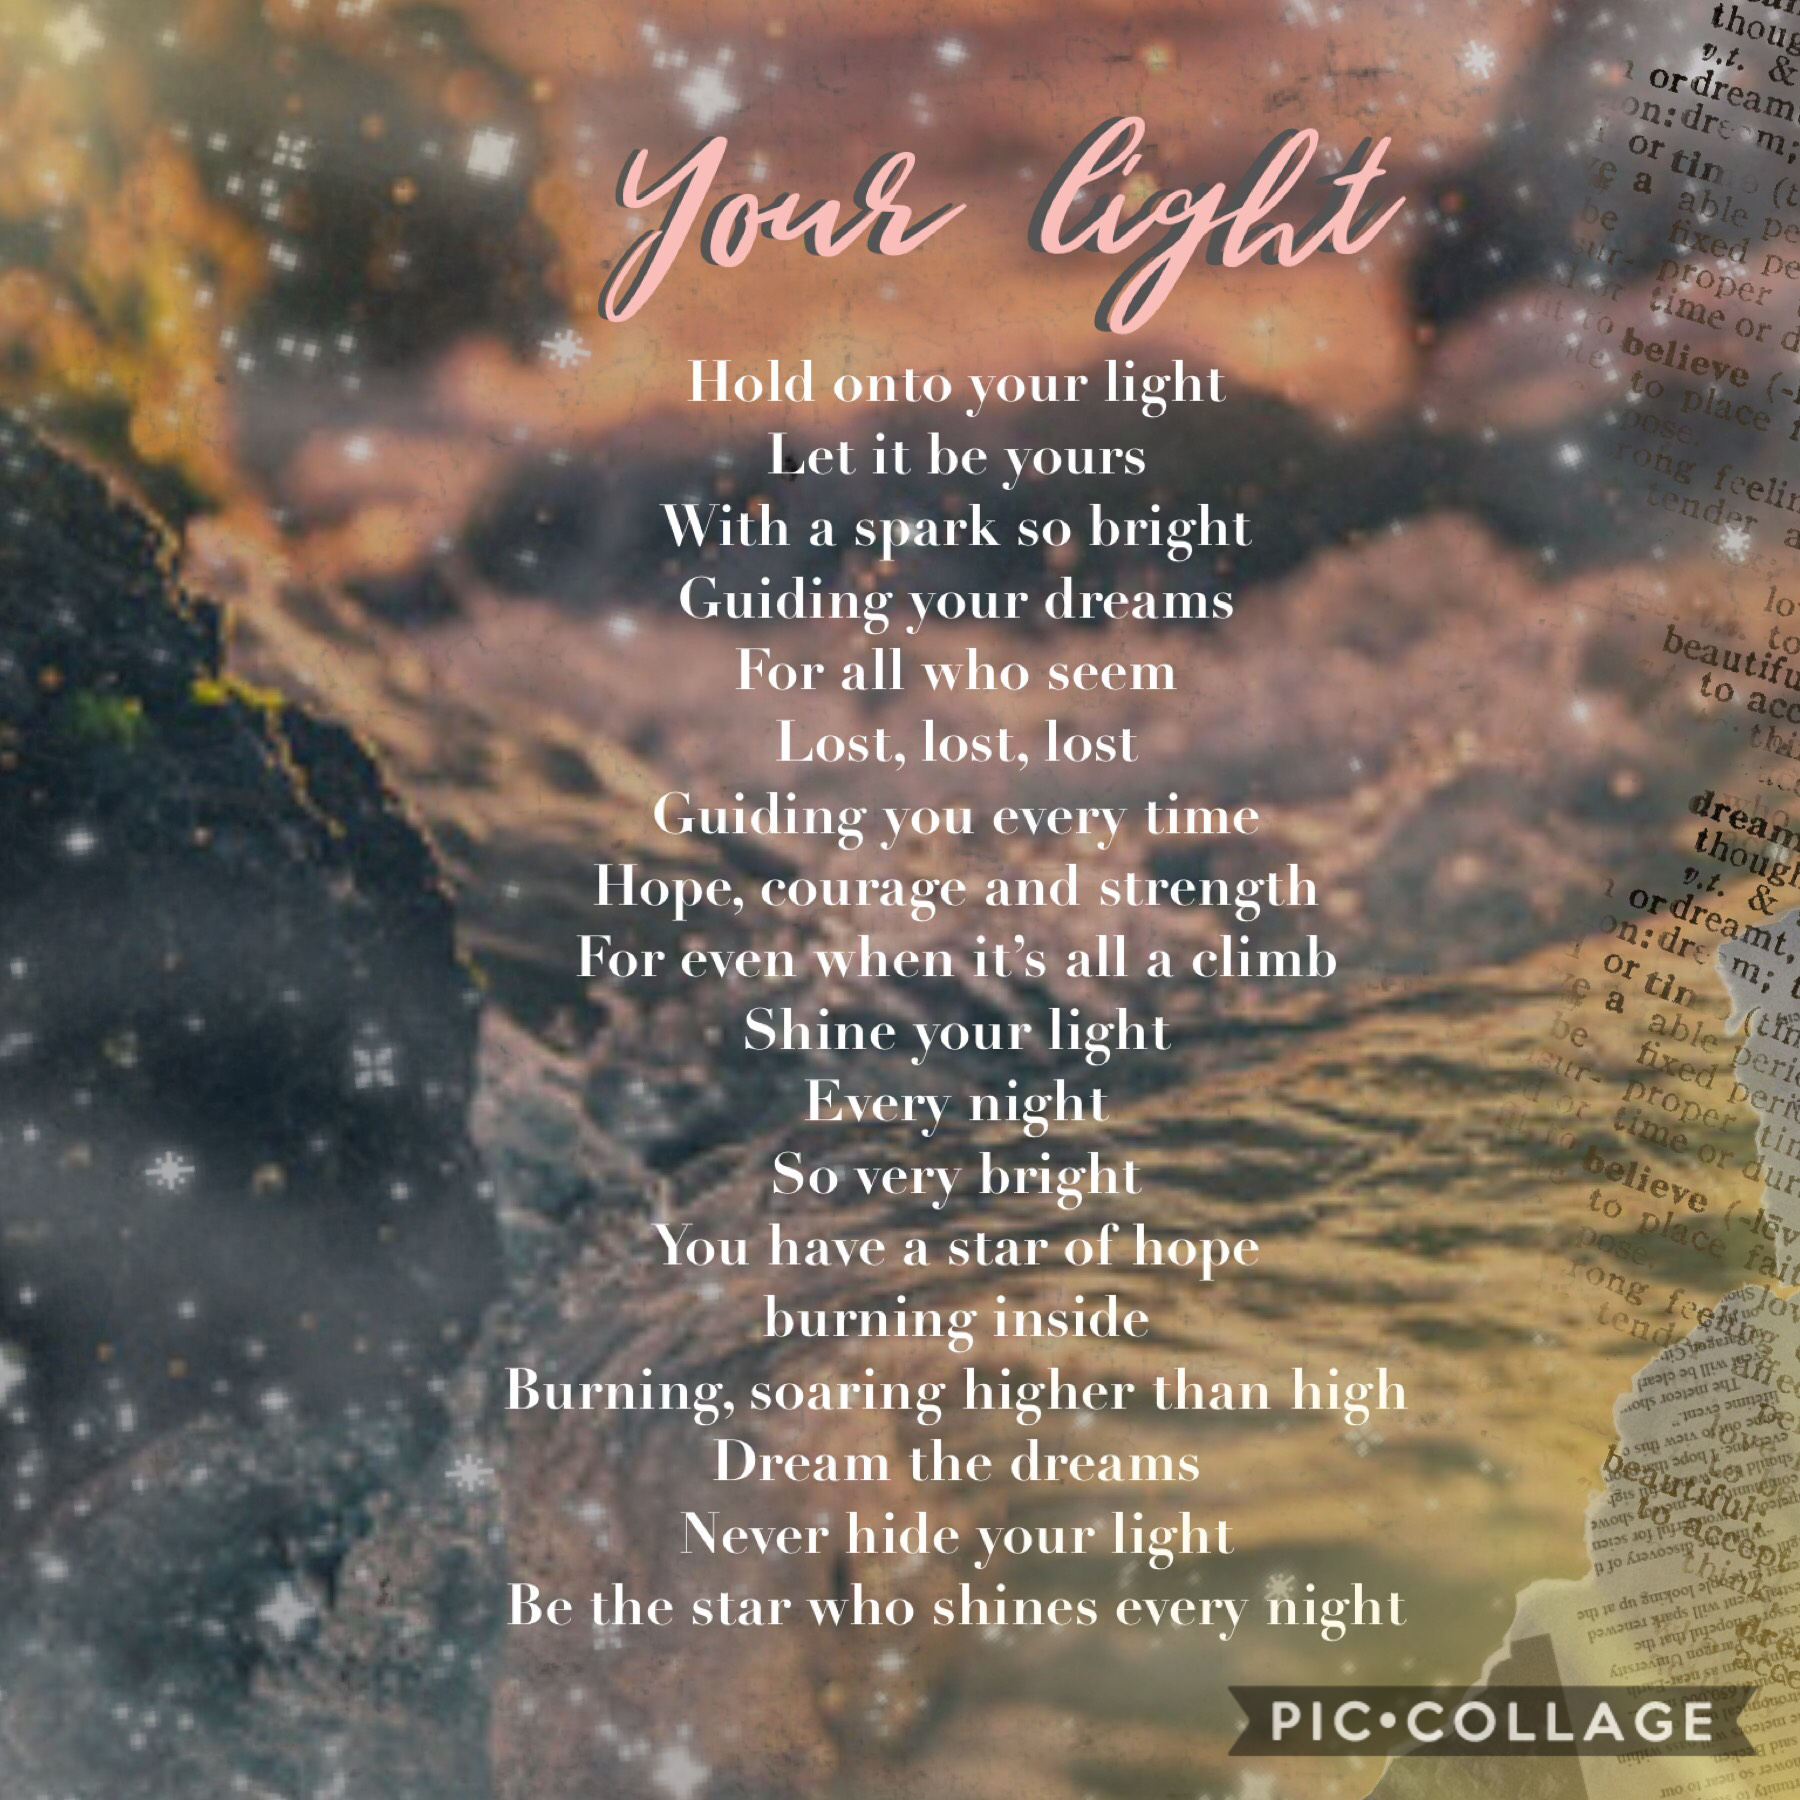 I tried writing a poem 🙈💓
It’s not very good, but I’m posting as I’m going to try posting more often and trying to make my account look less ‘put together’ and more me ☺️💓I’m actually using this for my music composition 🎶Comment any tips below if you’ve t